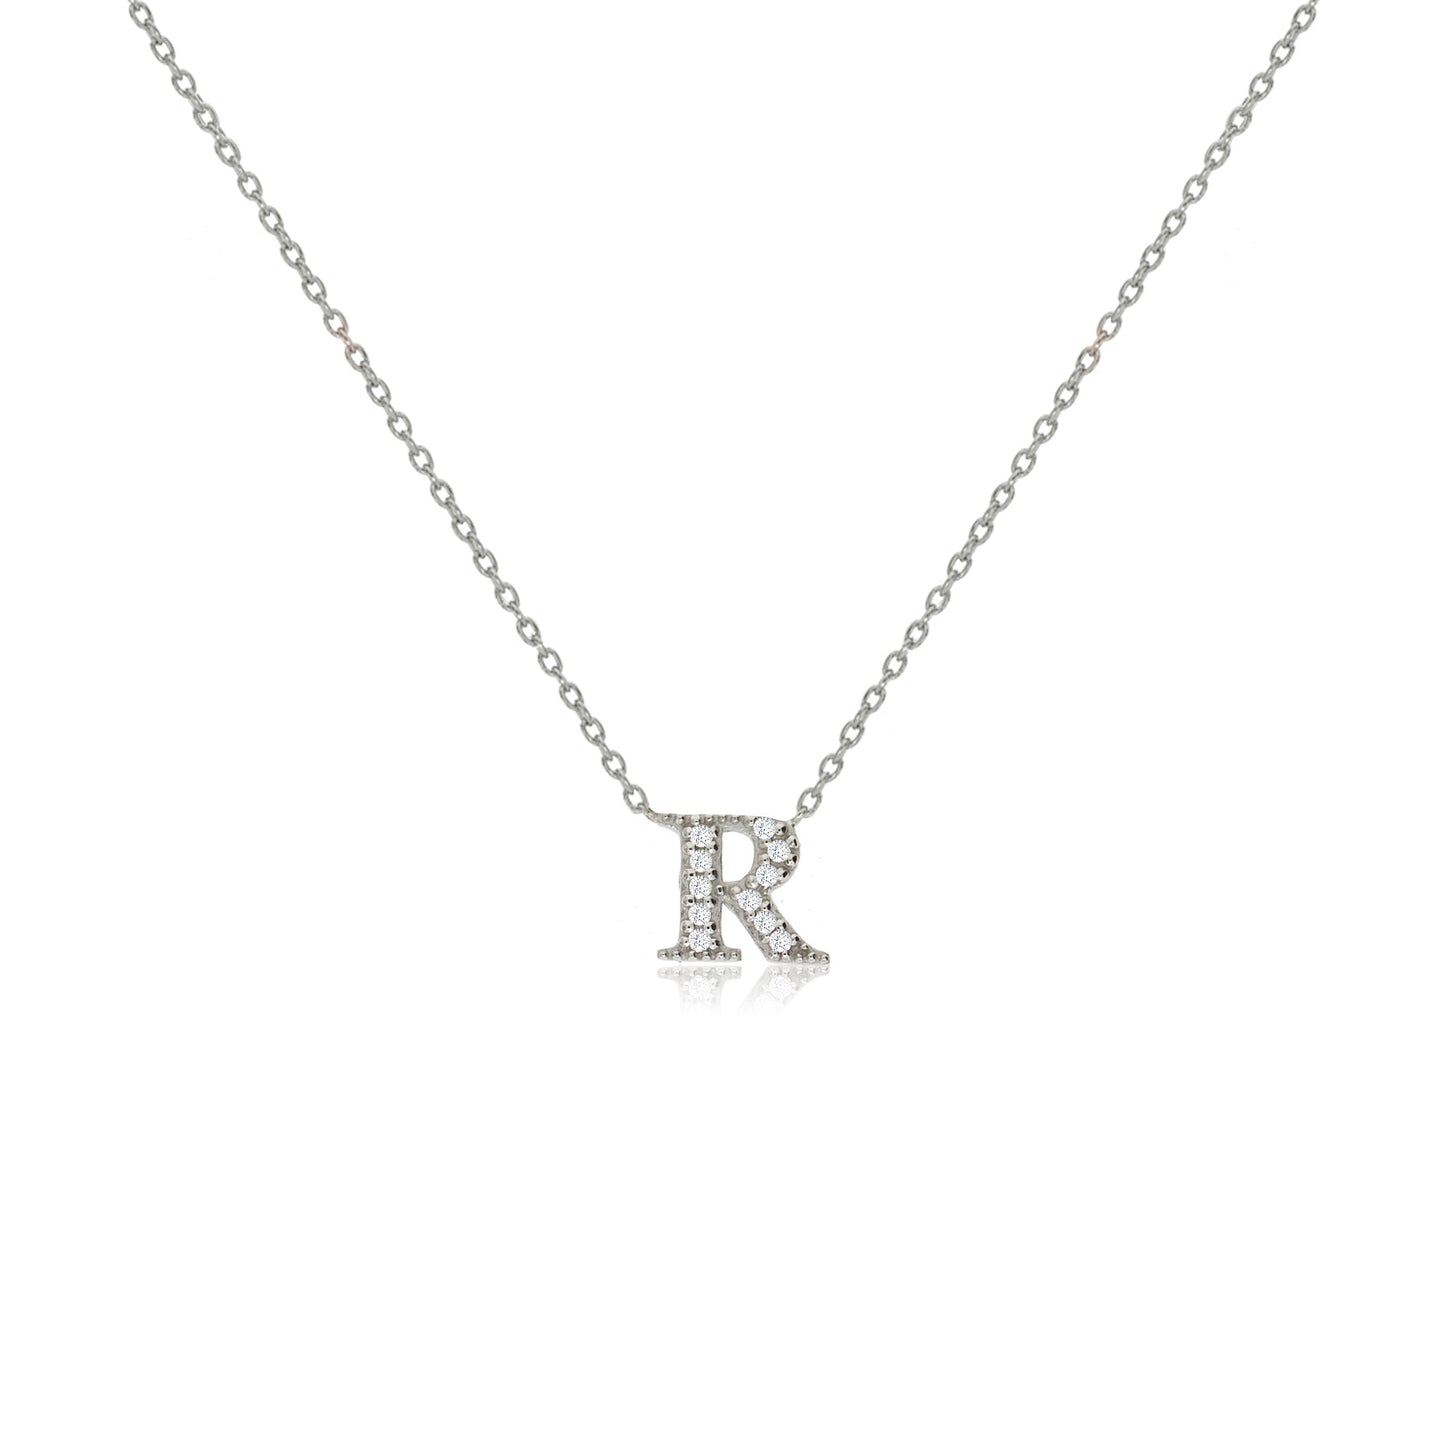 NT-26/S/R - Initial "R" Necklace with Sliding Length Adjuster